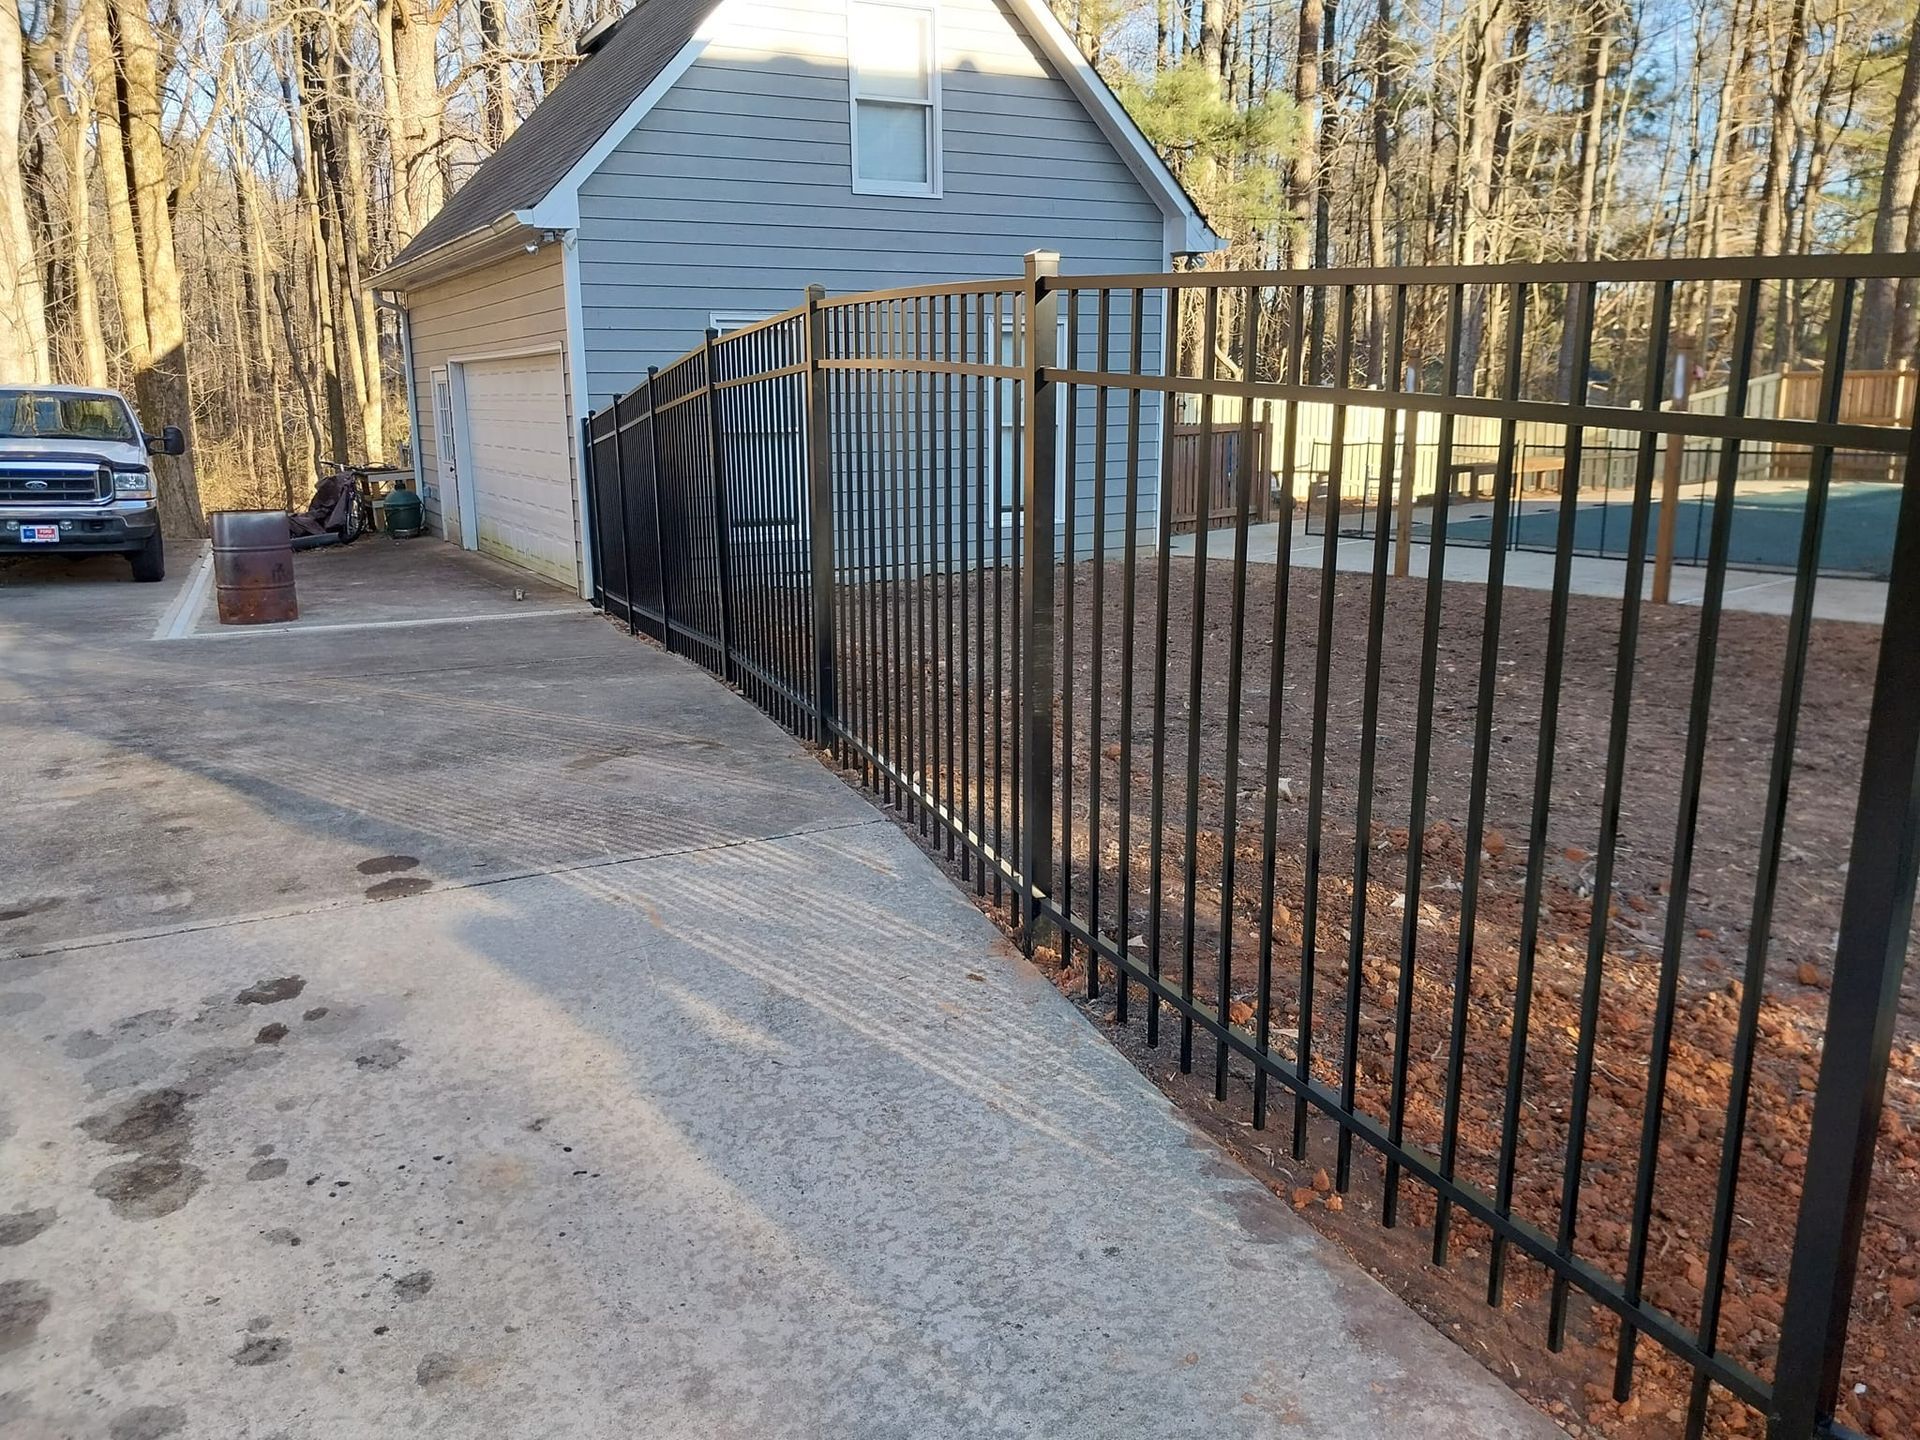 A black metal fence is surrounding a house in the woods.